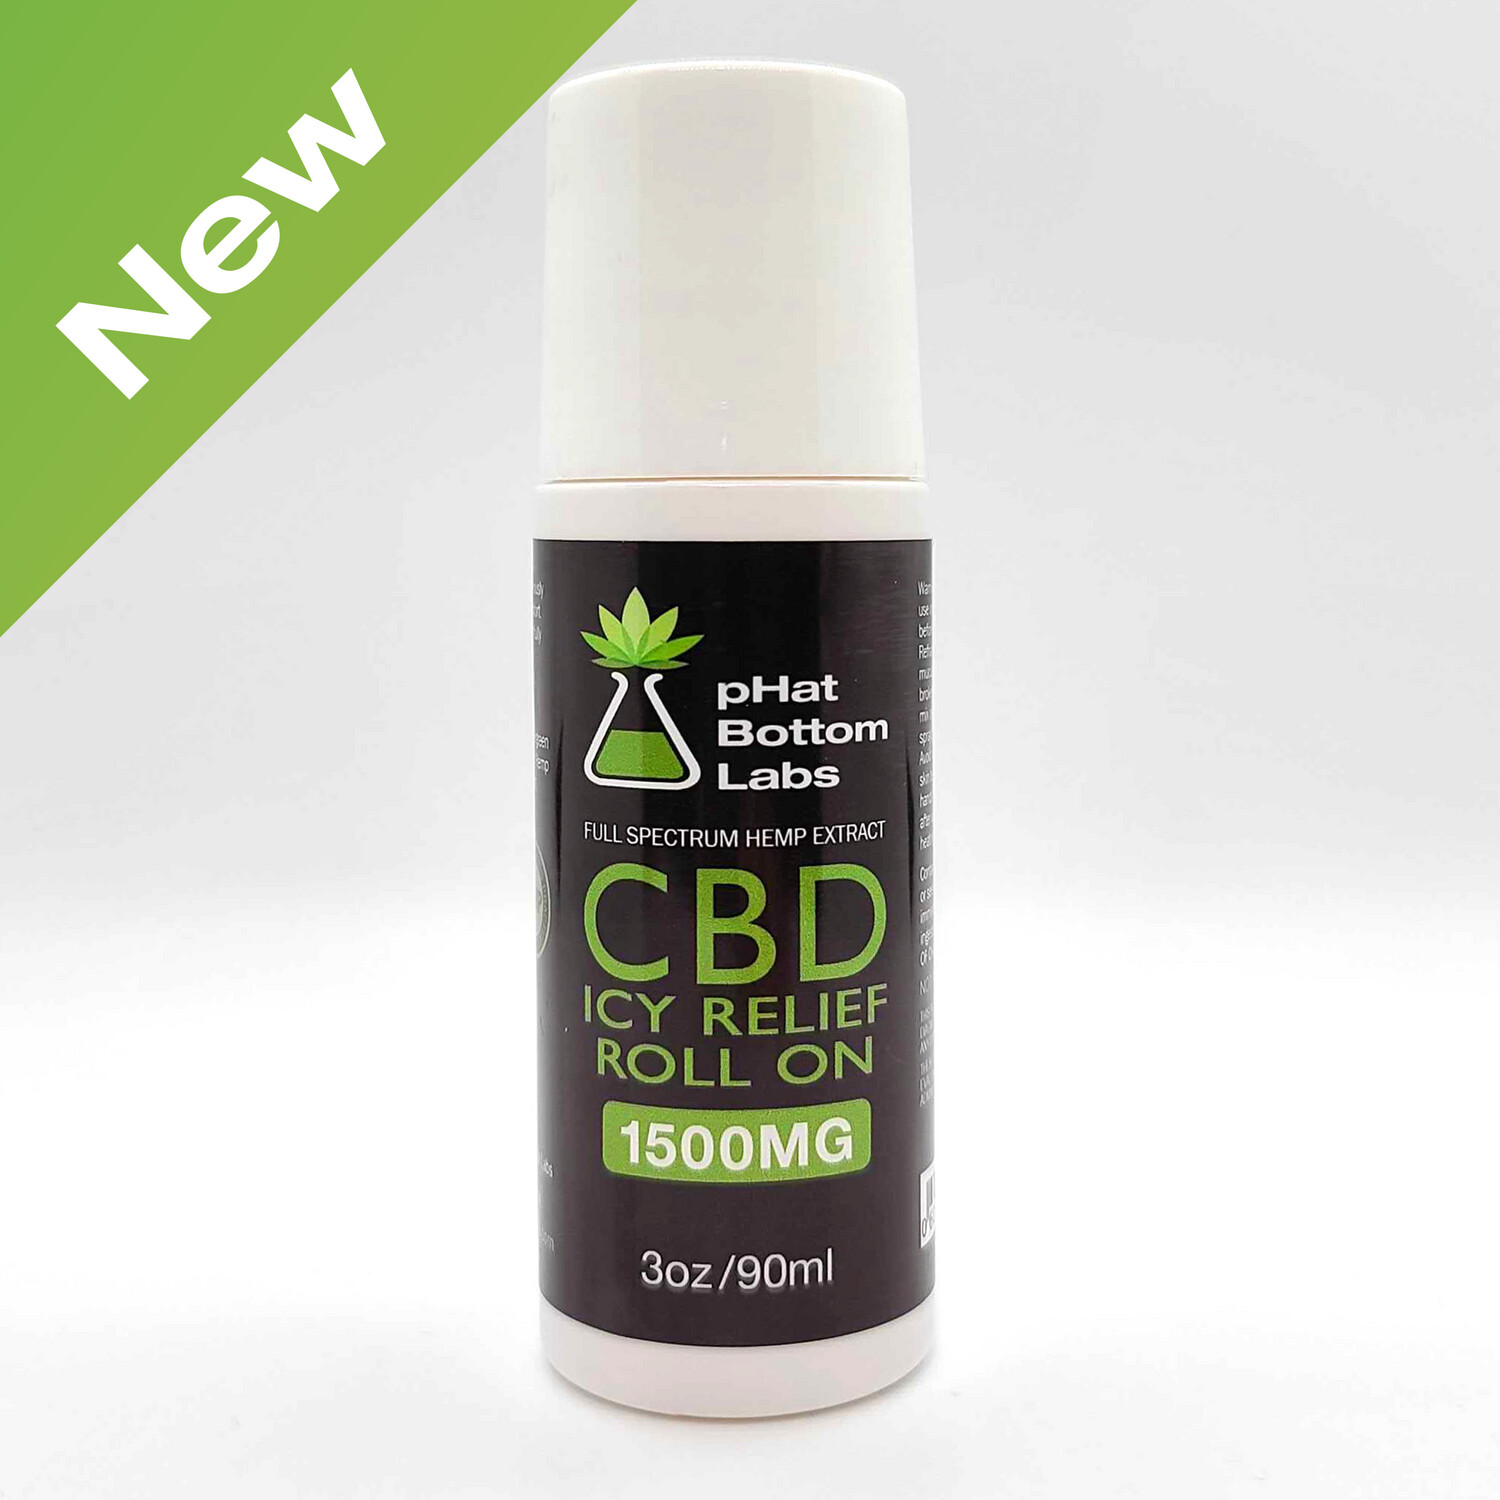 pHat Bottom CBD Icy Relief Roll-on 1500mg